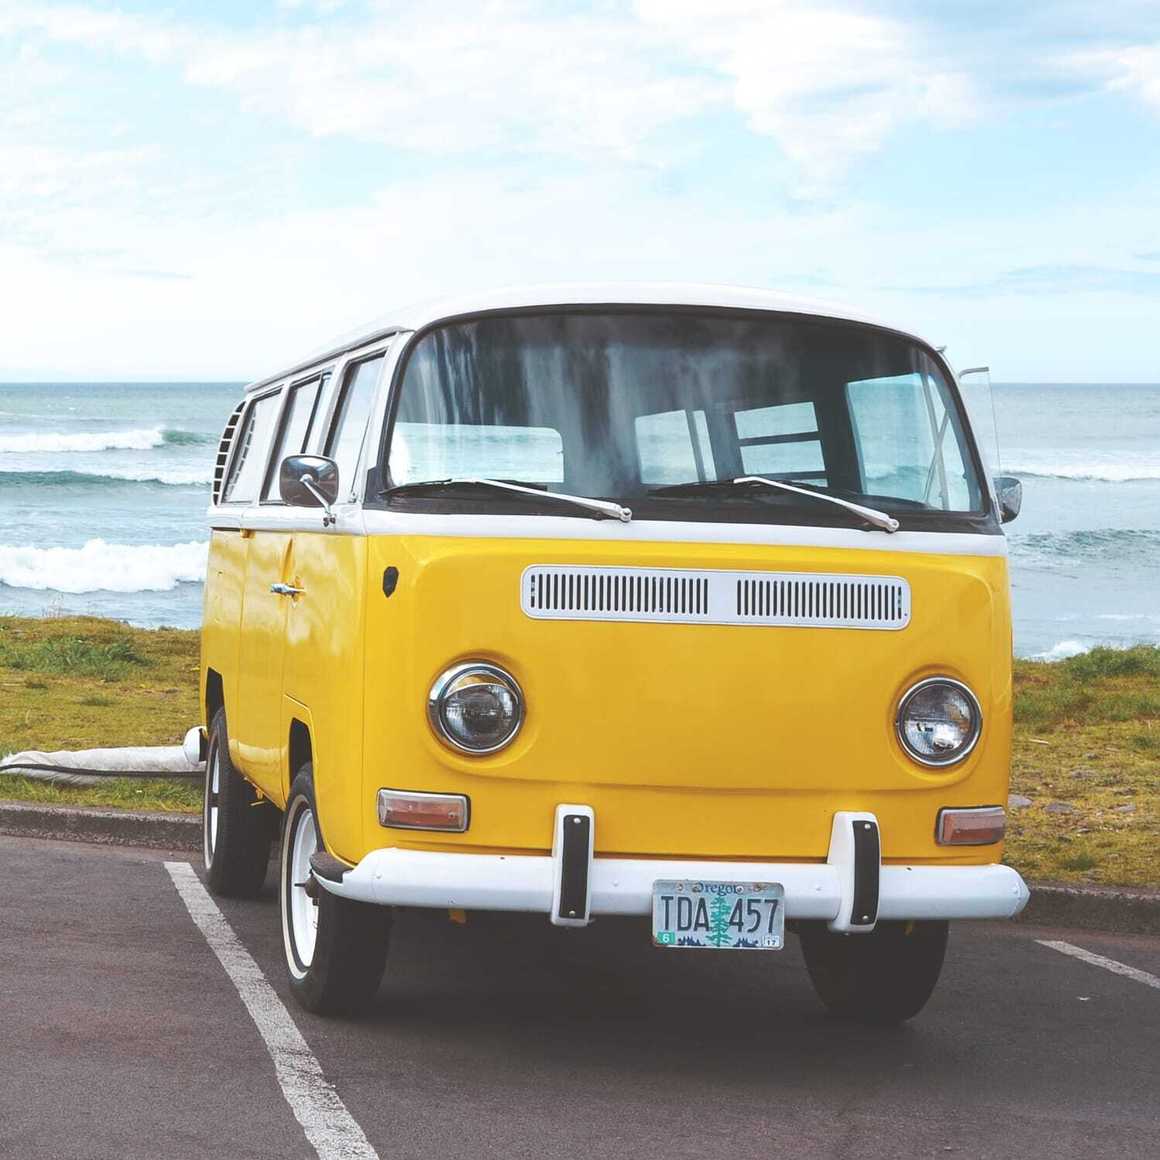 A yellow bus, cropped